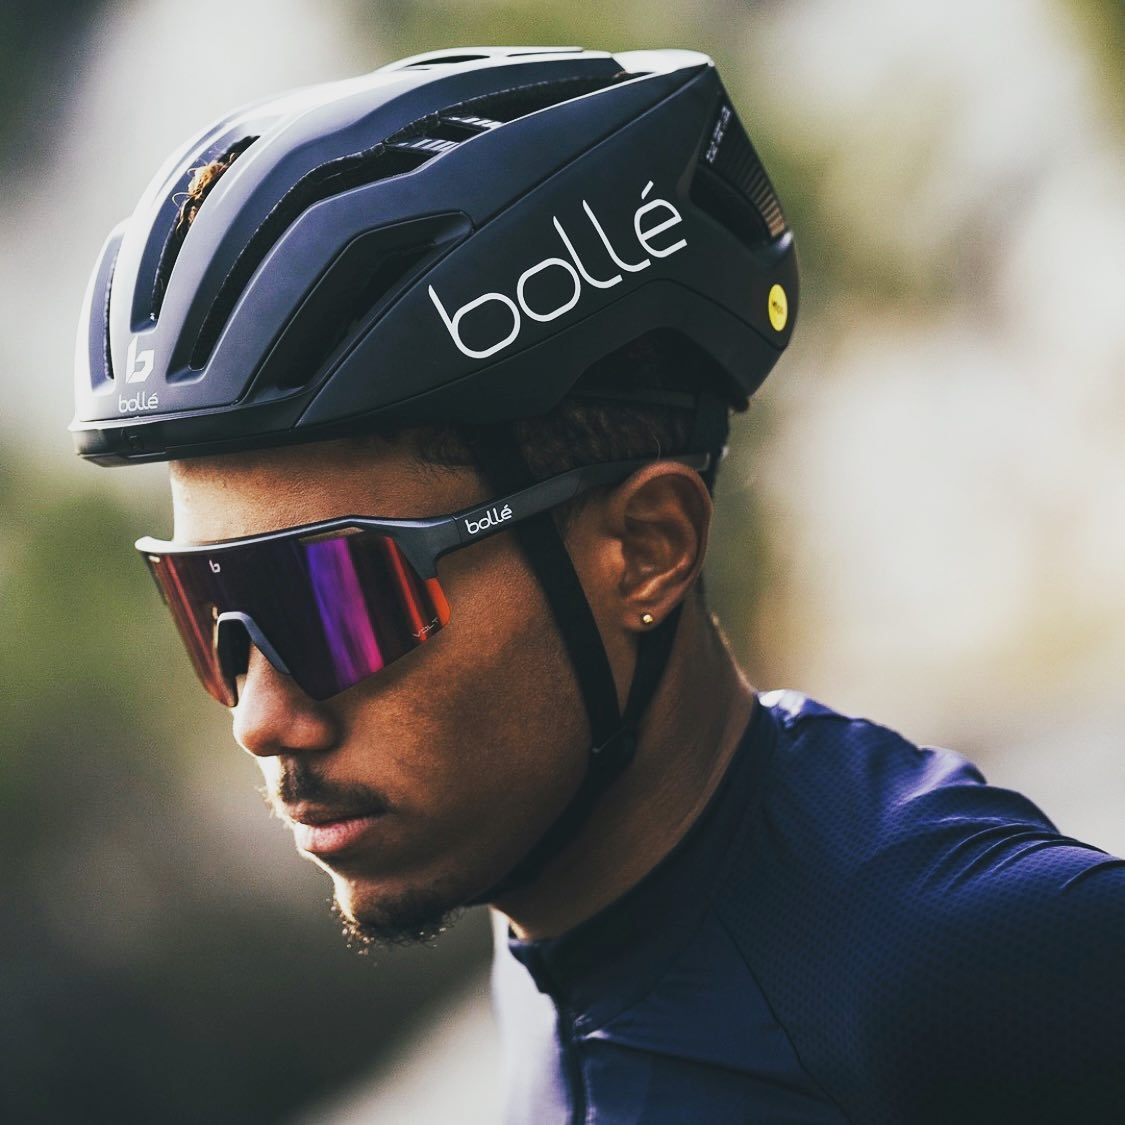 #bolleeyewear 

Experience the power of color on your bike. 
Equipped with the VOLT+, the C-shifter are perfect shades for your eyes!

#bollé #VOLT #cycling #cyclingeyewear #tielt #sportbrillen #fietsbril #sportbrilopsterkte